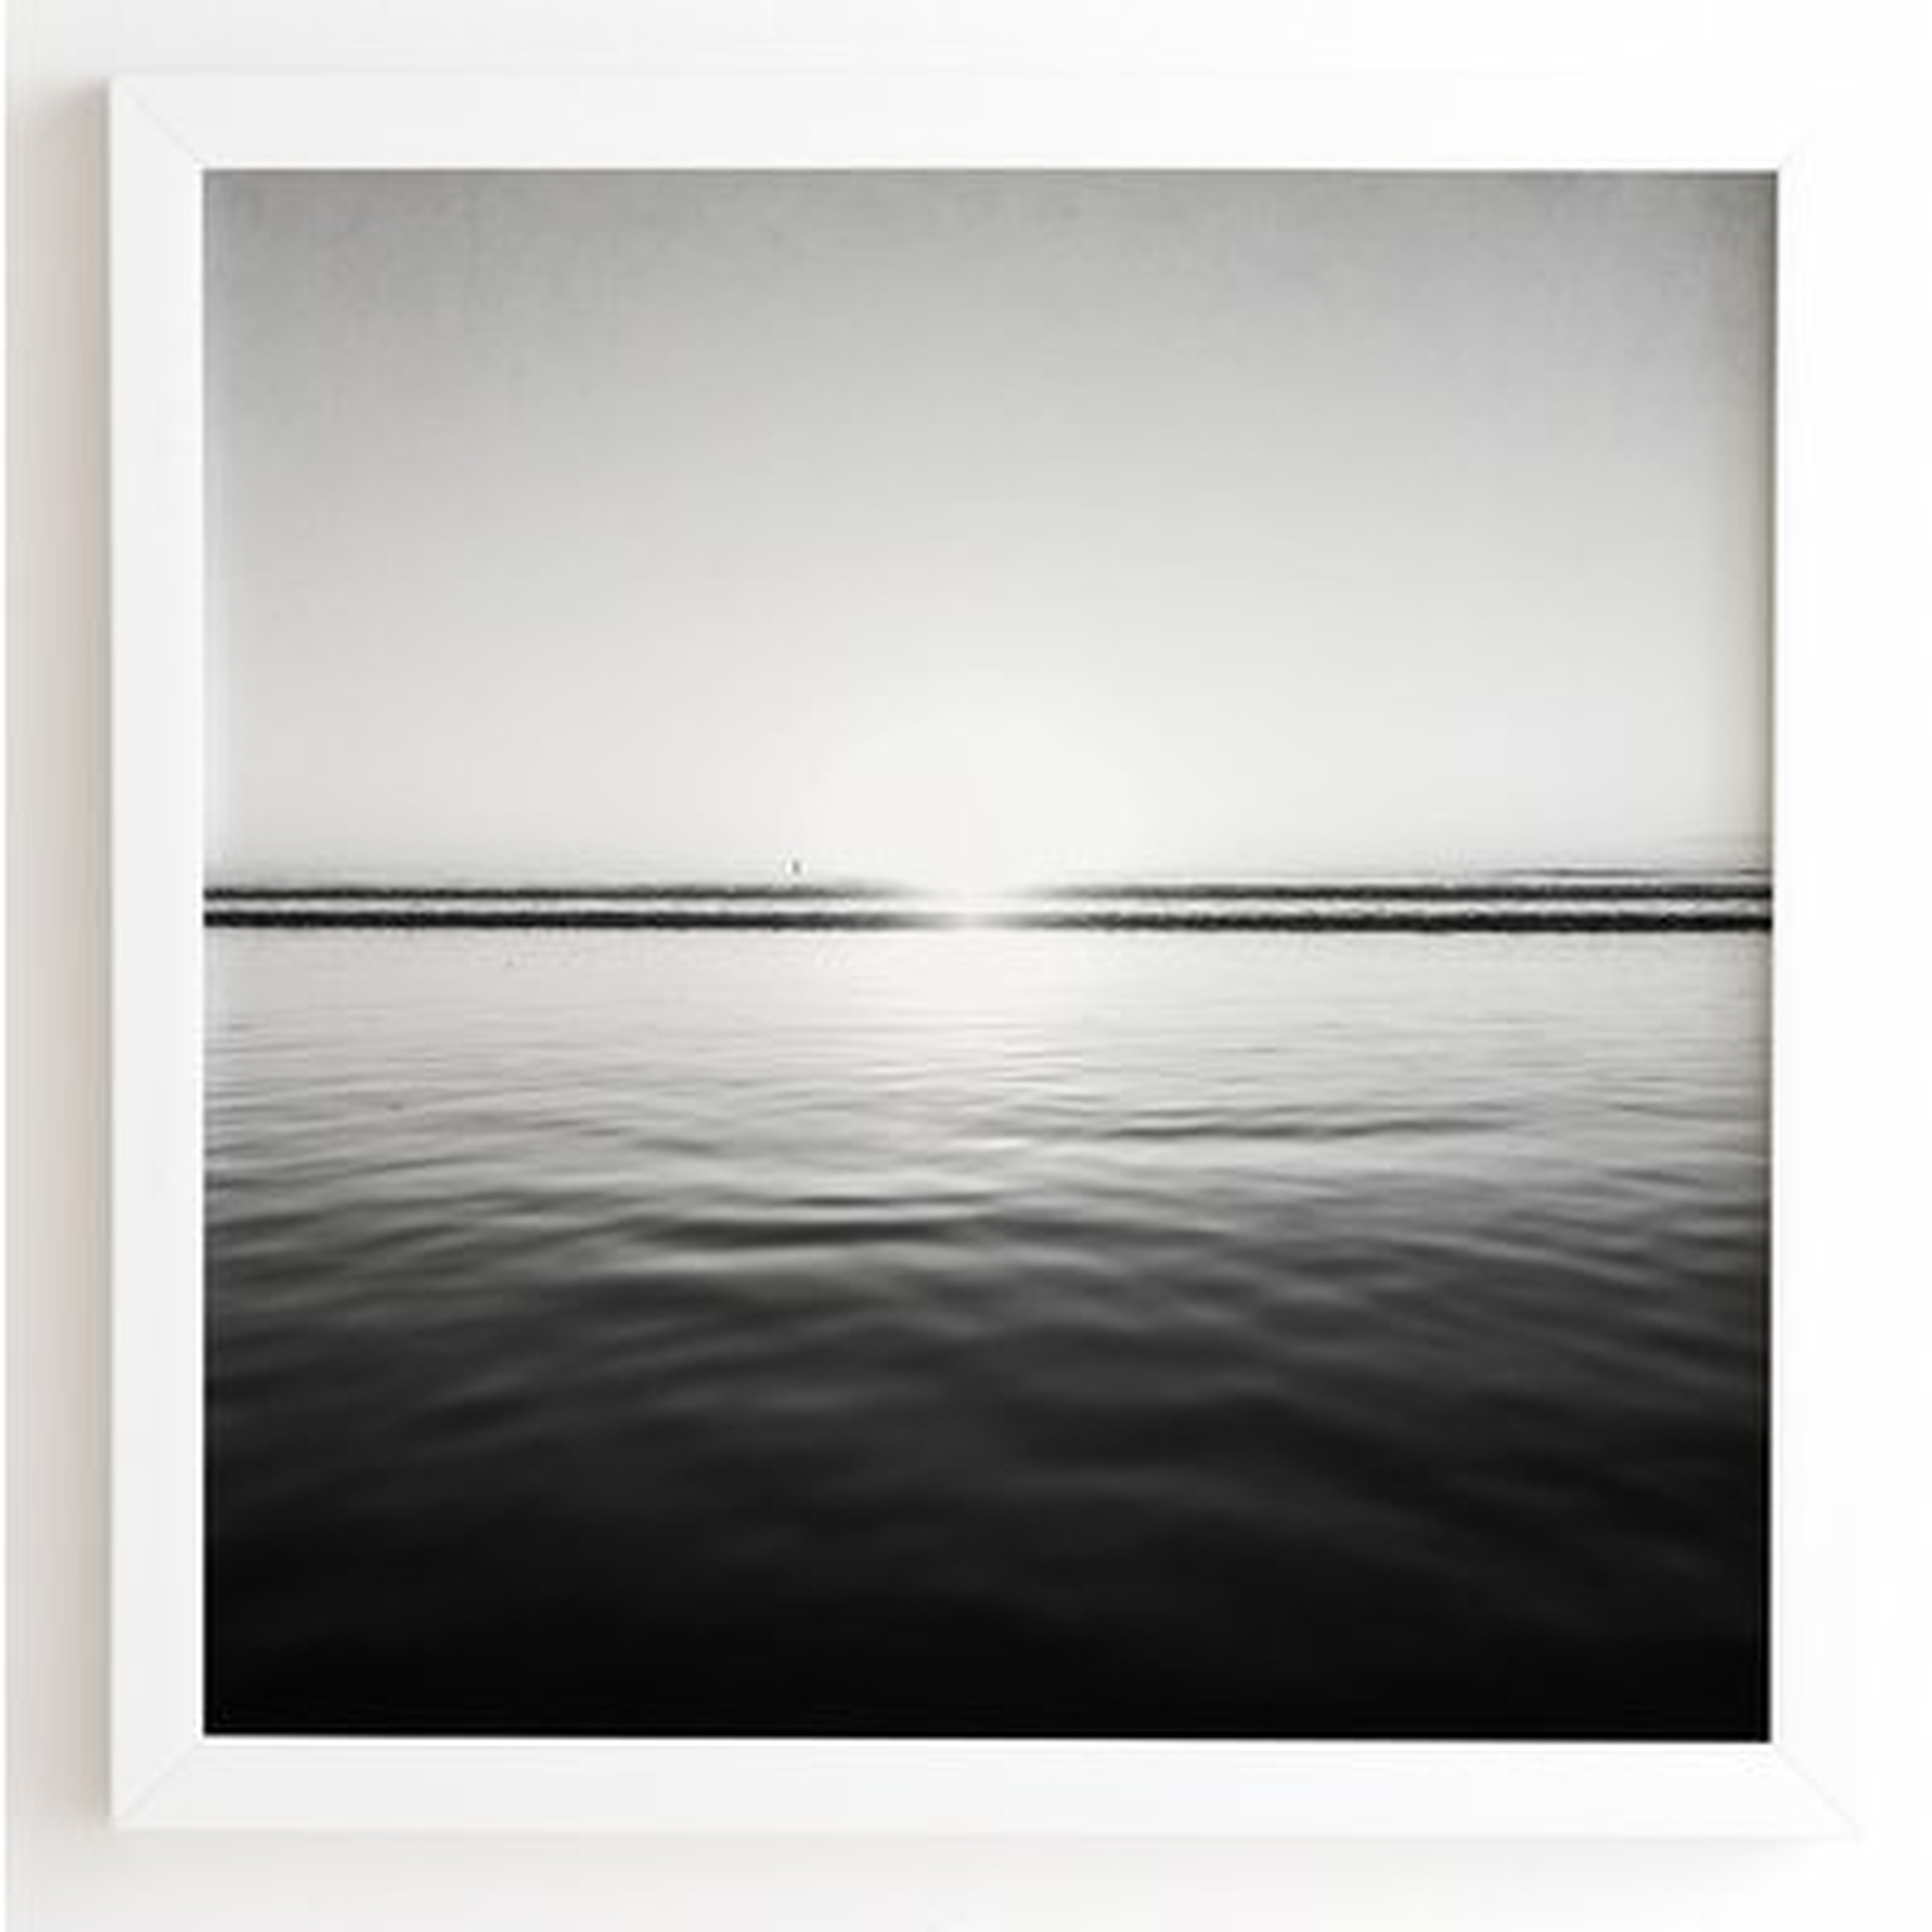 Calm Sea by Bree Madden - Picture Frame Photograph Print on Wood - AllModern